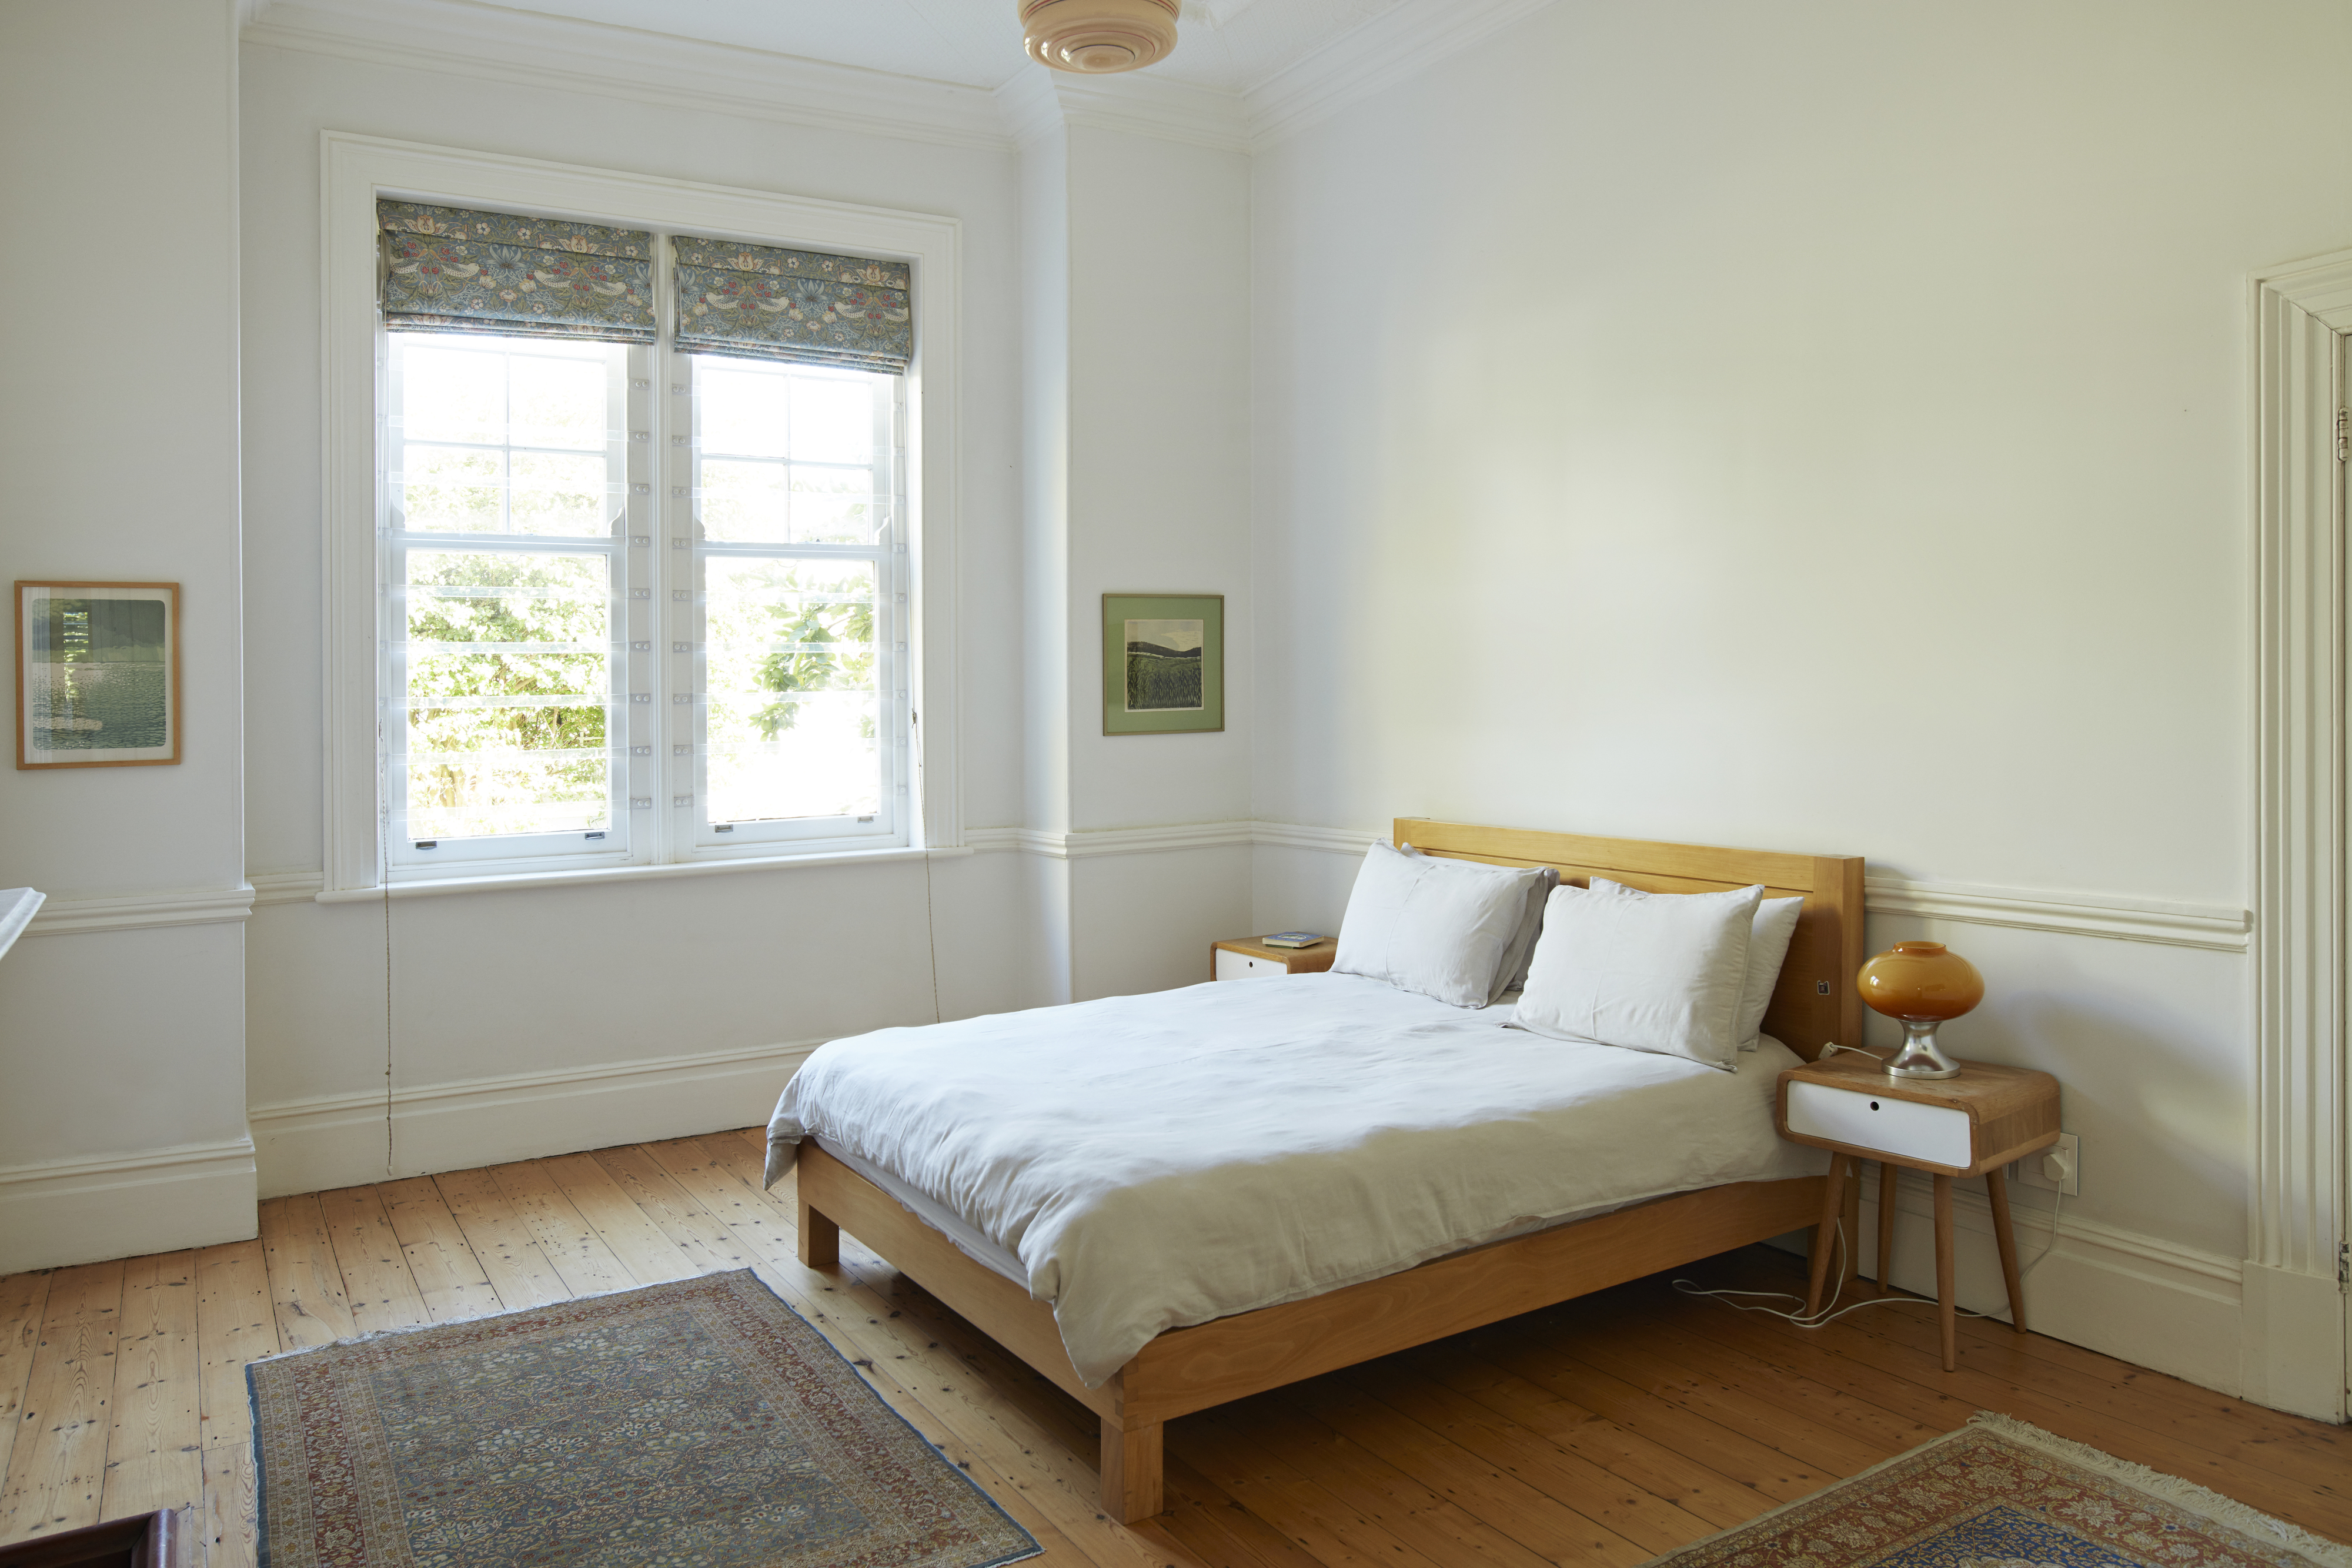 A bedroom with white walls, a platform wood bed, and white bedding